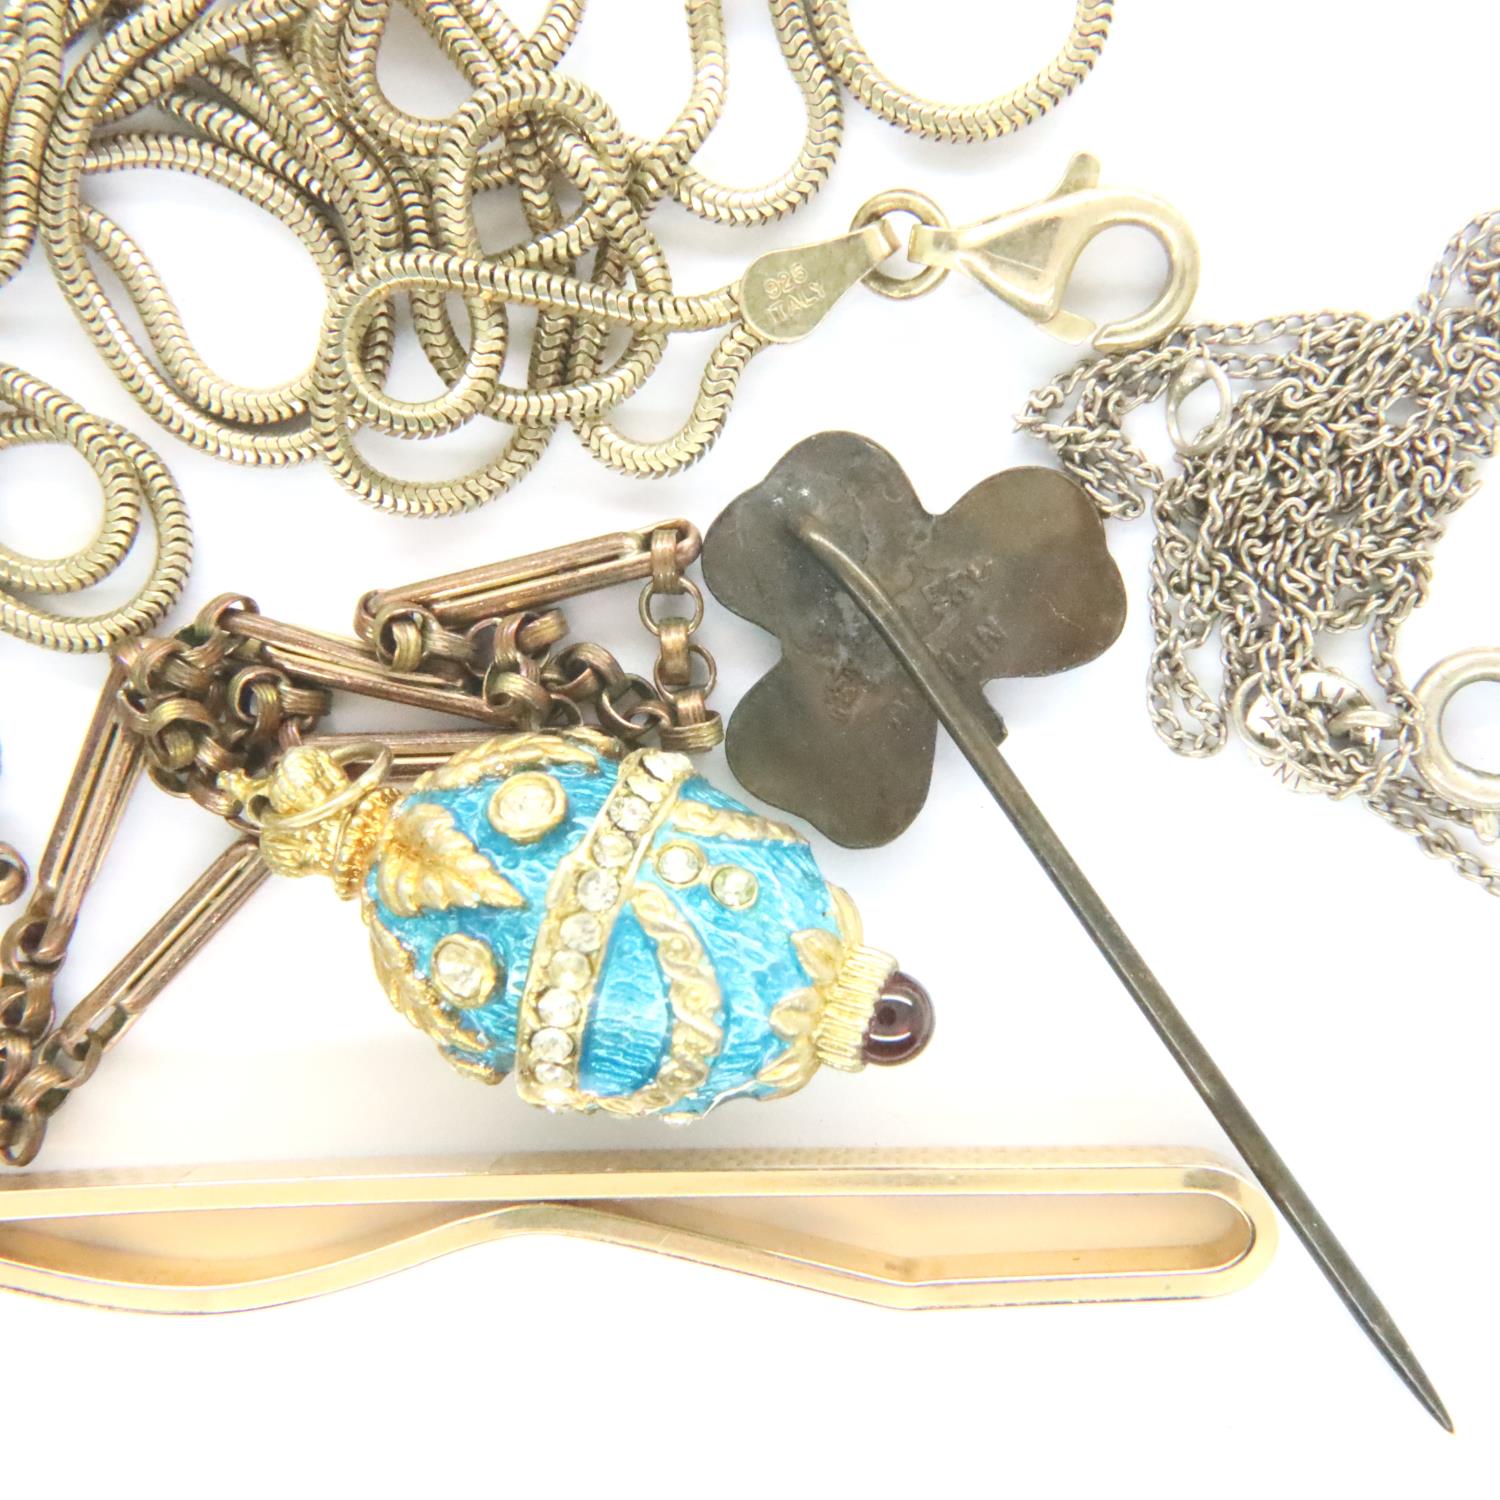 Collection of vintage costume jewellery, including an enamelled egg pendant, tie clip, neck chains - Image 3 of 3